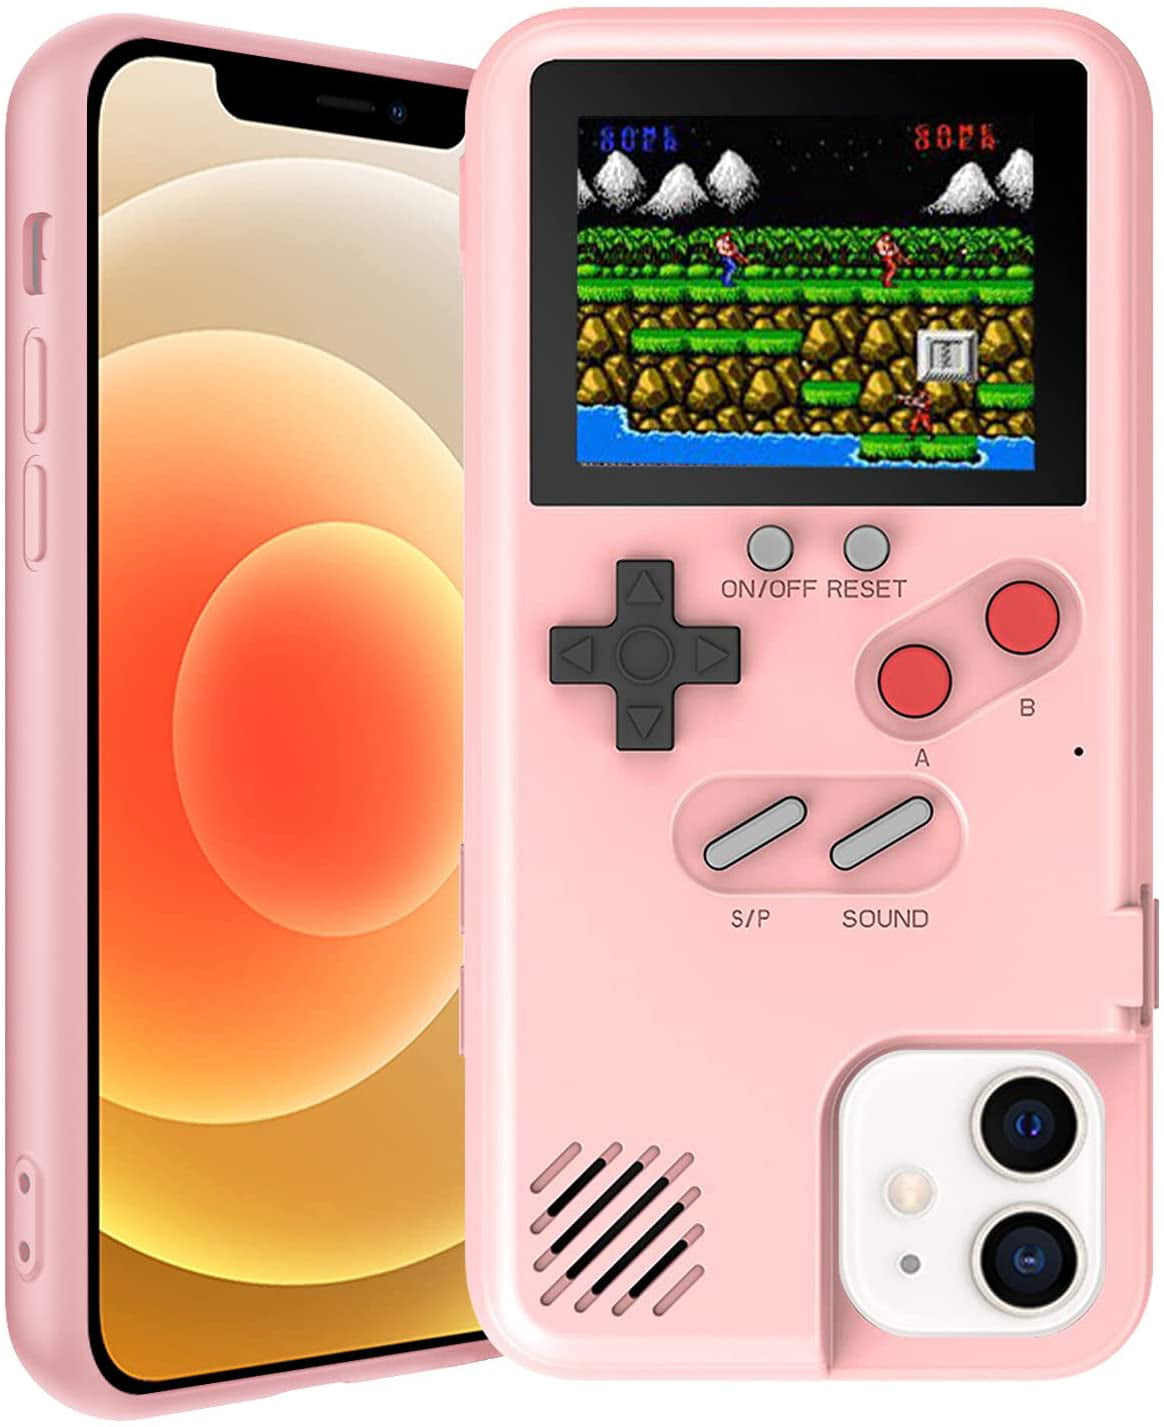 Gameboy Phone Case for iPhone 13 Pro Max Retro 3D Playable Game Console with 36 Small Video Games Super Funny Phone Case with Color Display Pink 